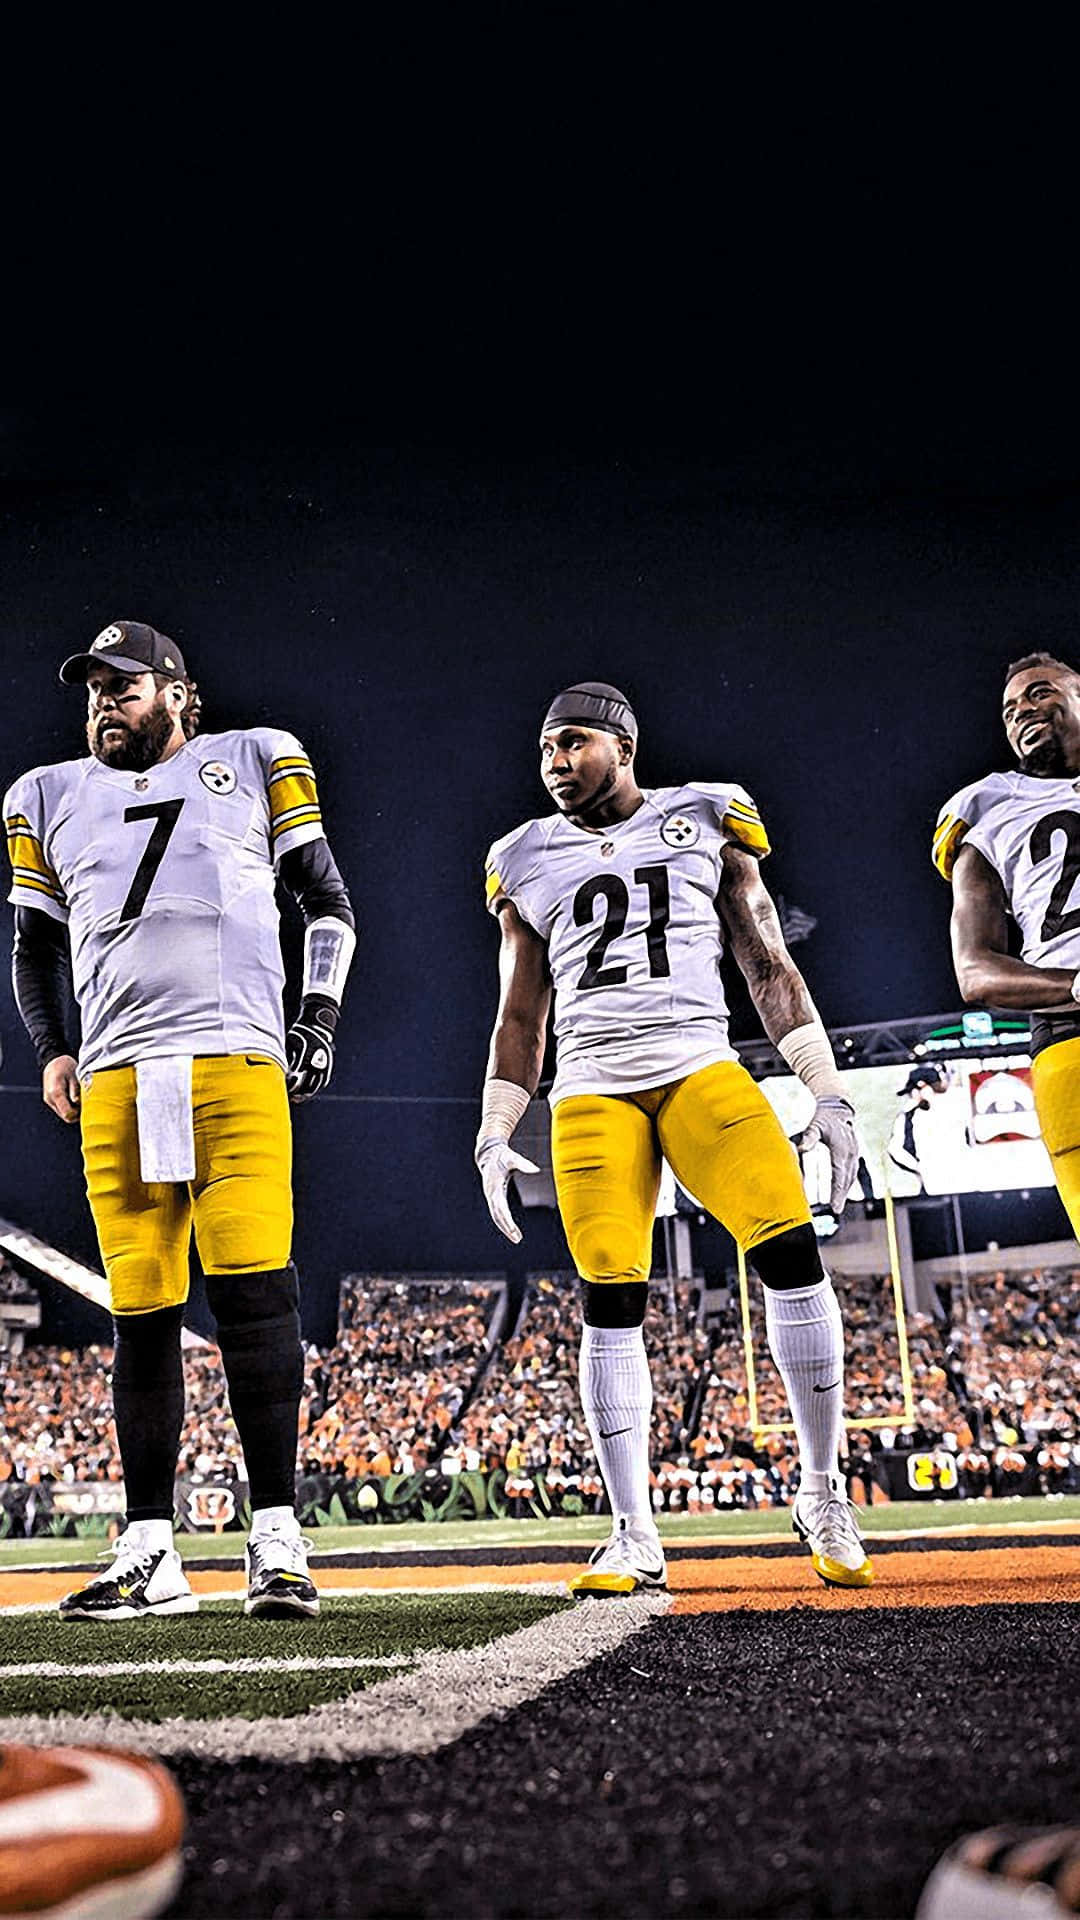 Check out the official Steelers iPhone Wallpaper